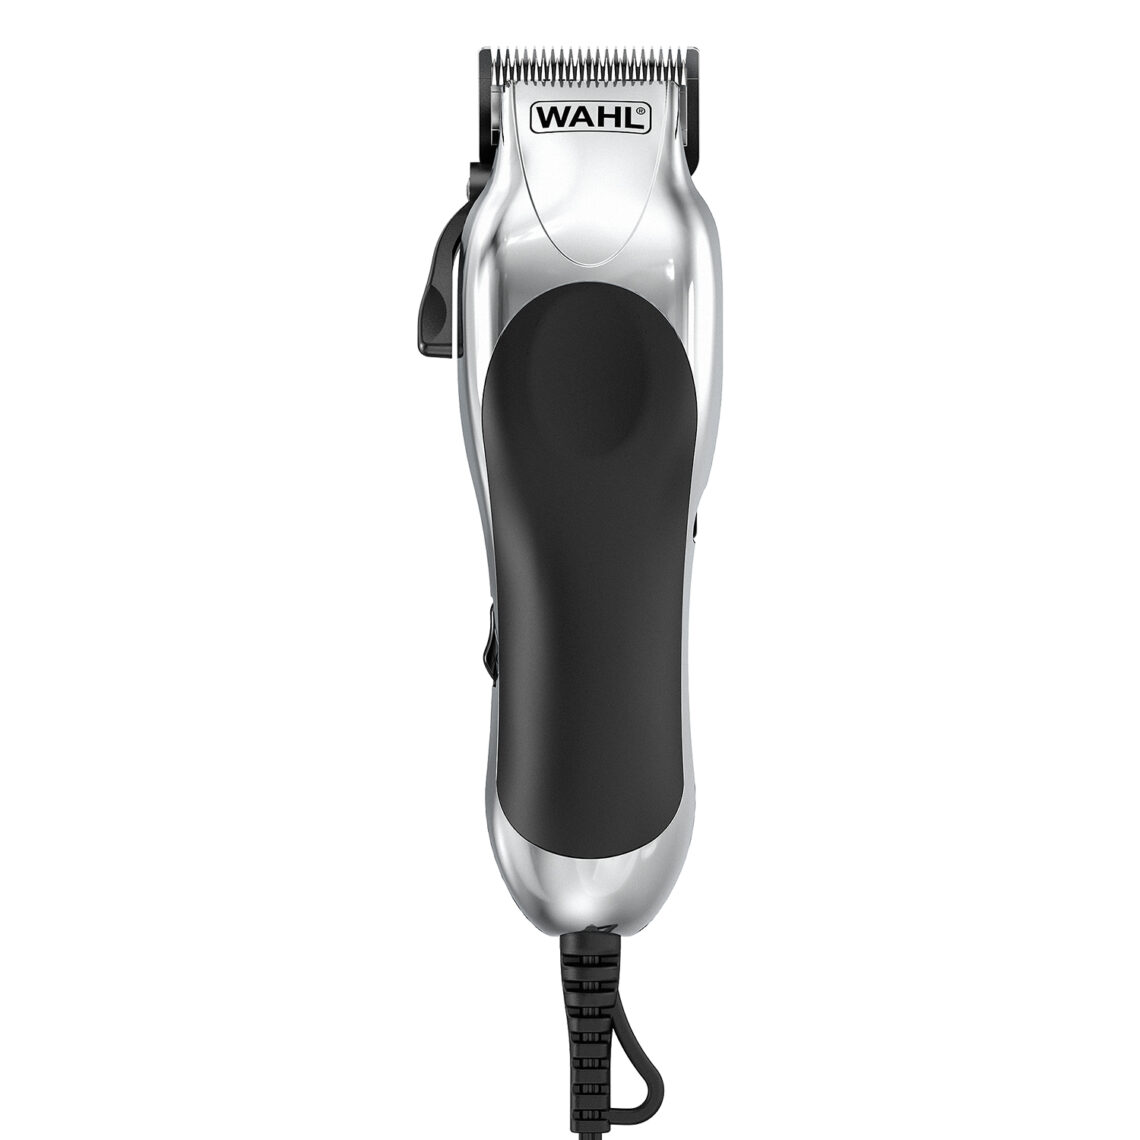 Wahl Chrome Pro Corded Hair Clipper